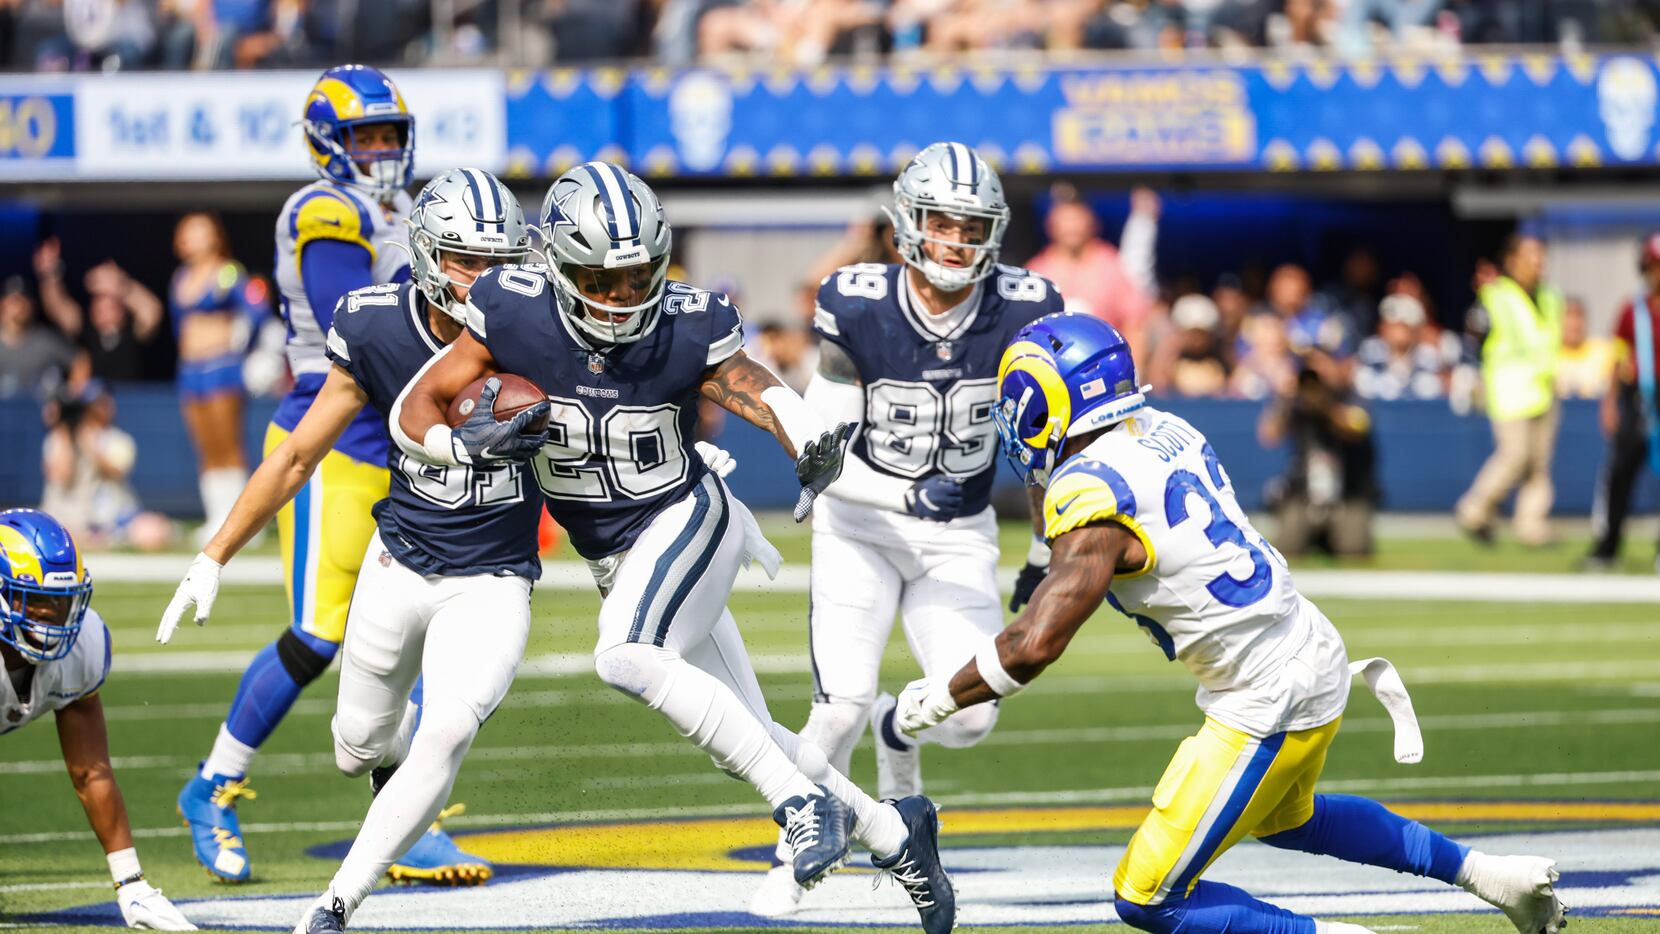 Grading the Cowboys: Dallas dominates run game to top Rams on the road